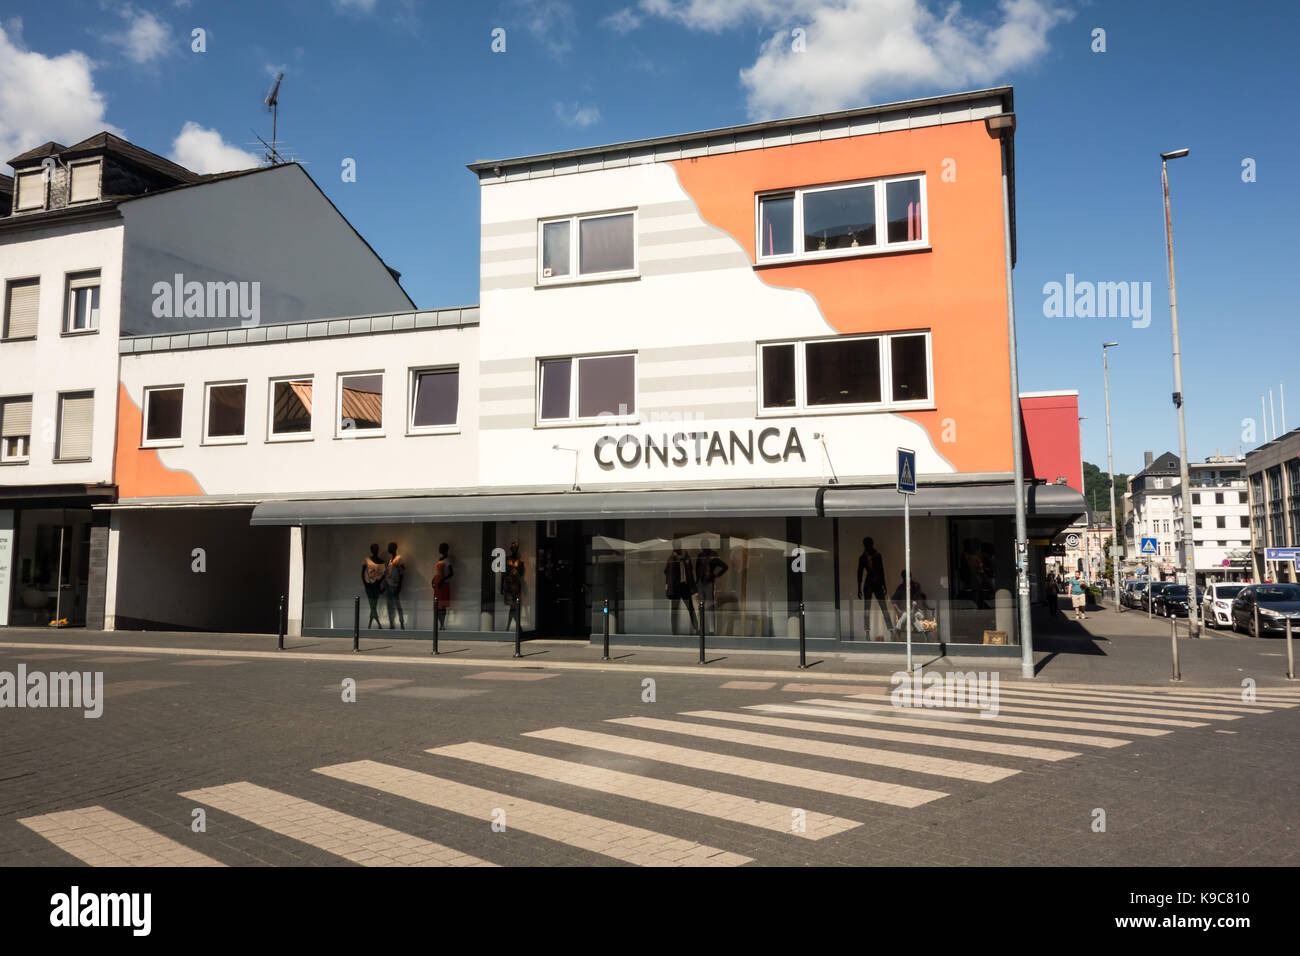 TRIER, GERMANY - 6TH Aug 17:  Constanca is a fashionable clothes retail store that sell popular high street brands. Stock Photo